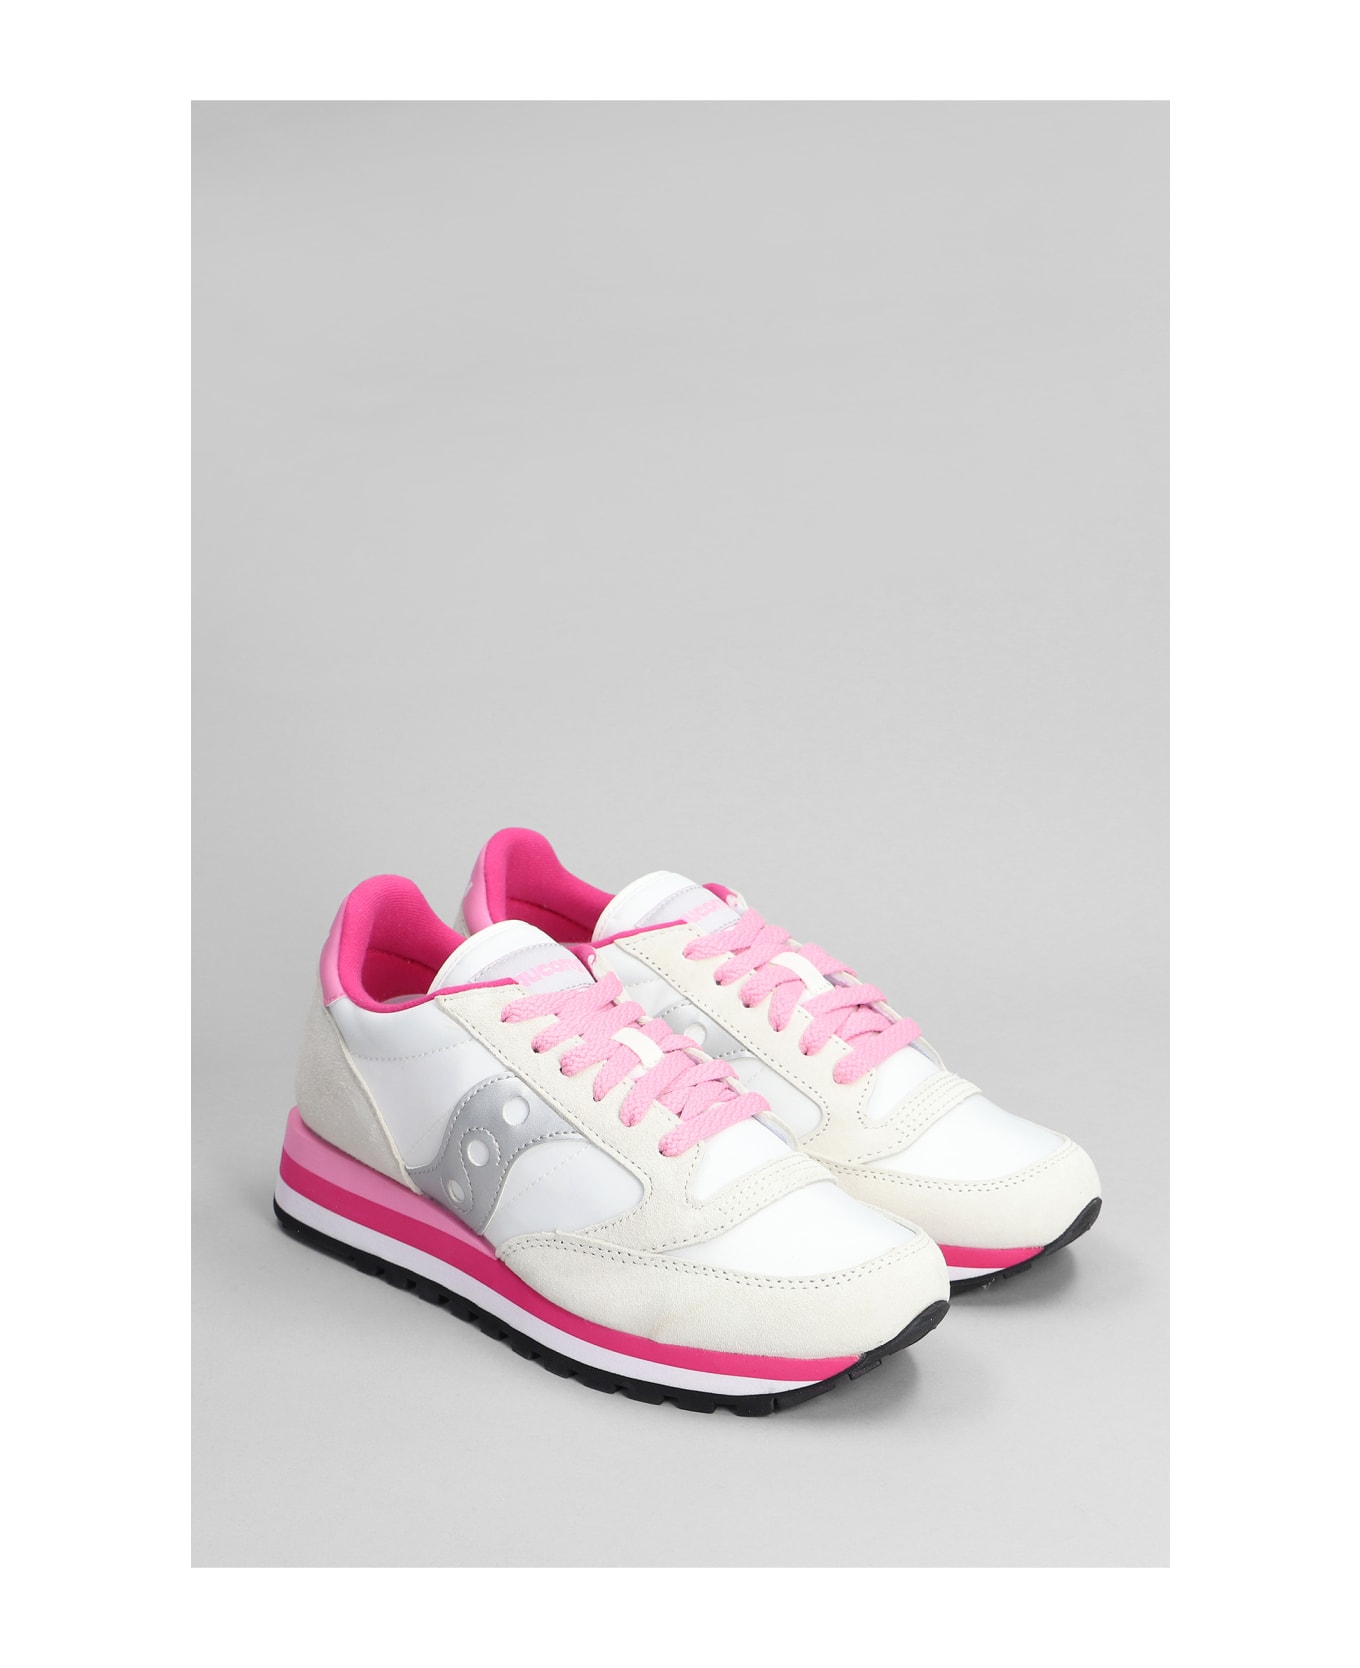 Saucony Jazz Triple Sneakers In White Suede And Fabric - White/gray/pink